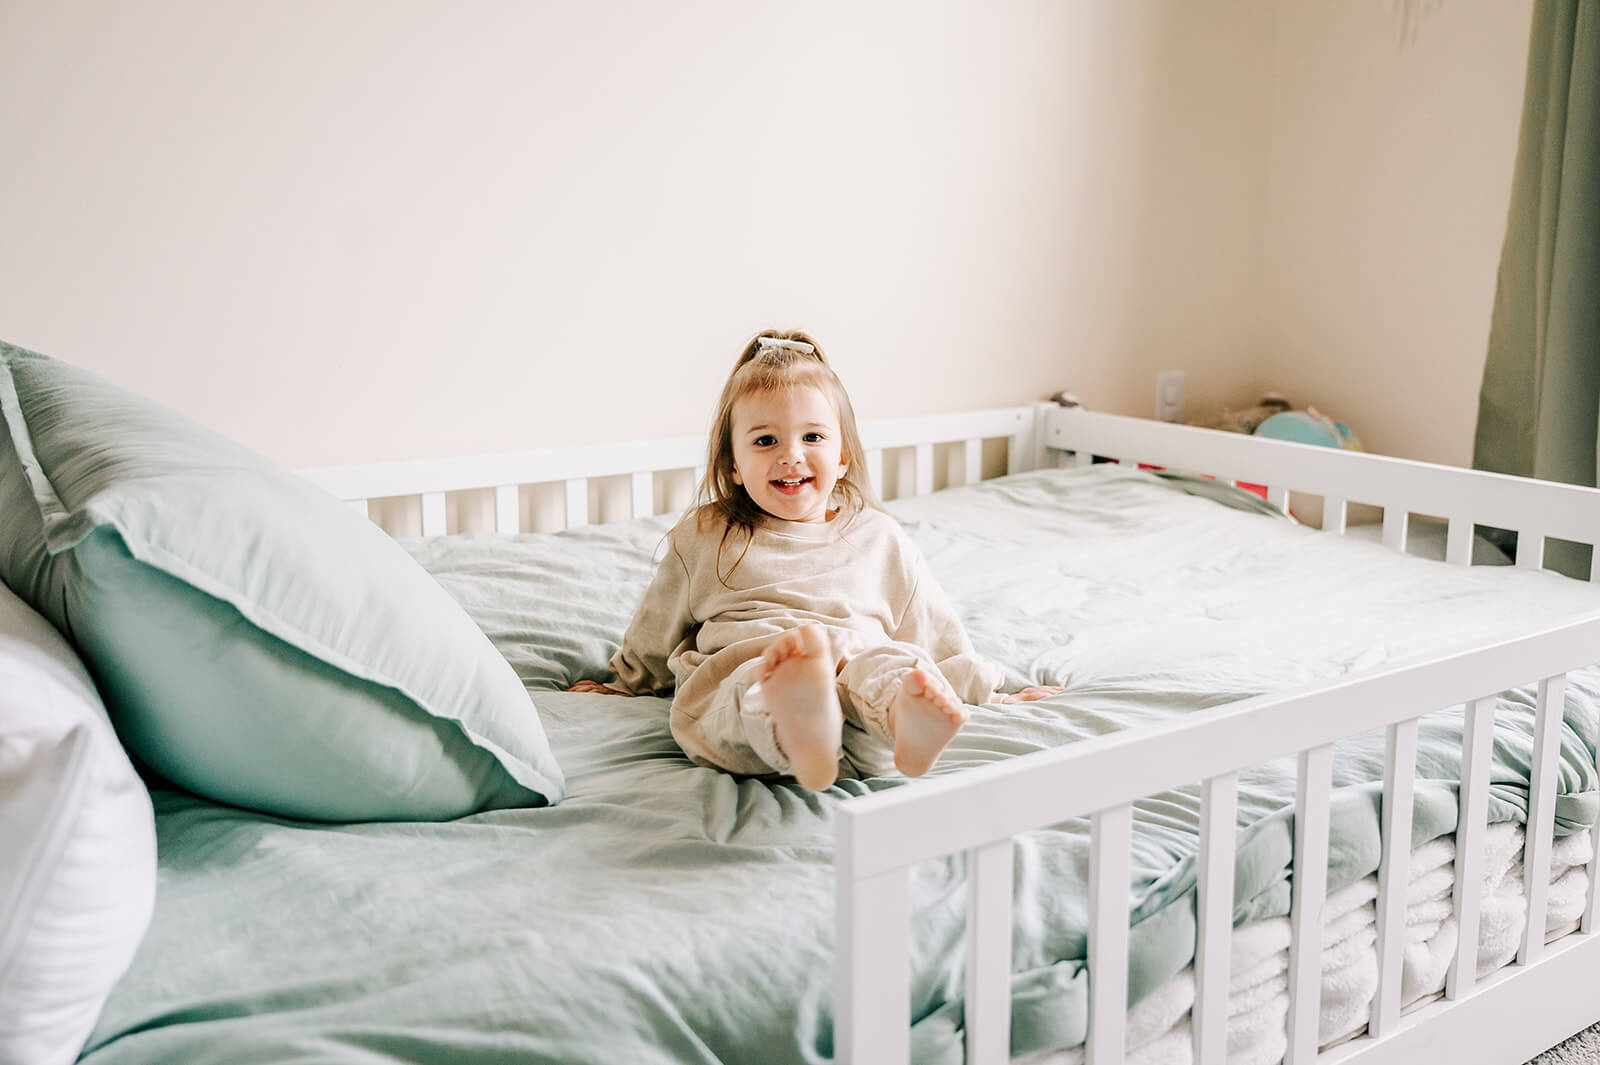 A toddler girl plays on a bed in her room with a big smile